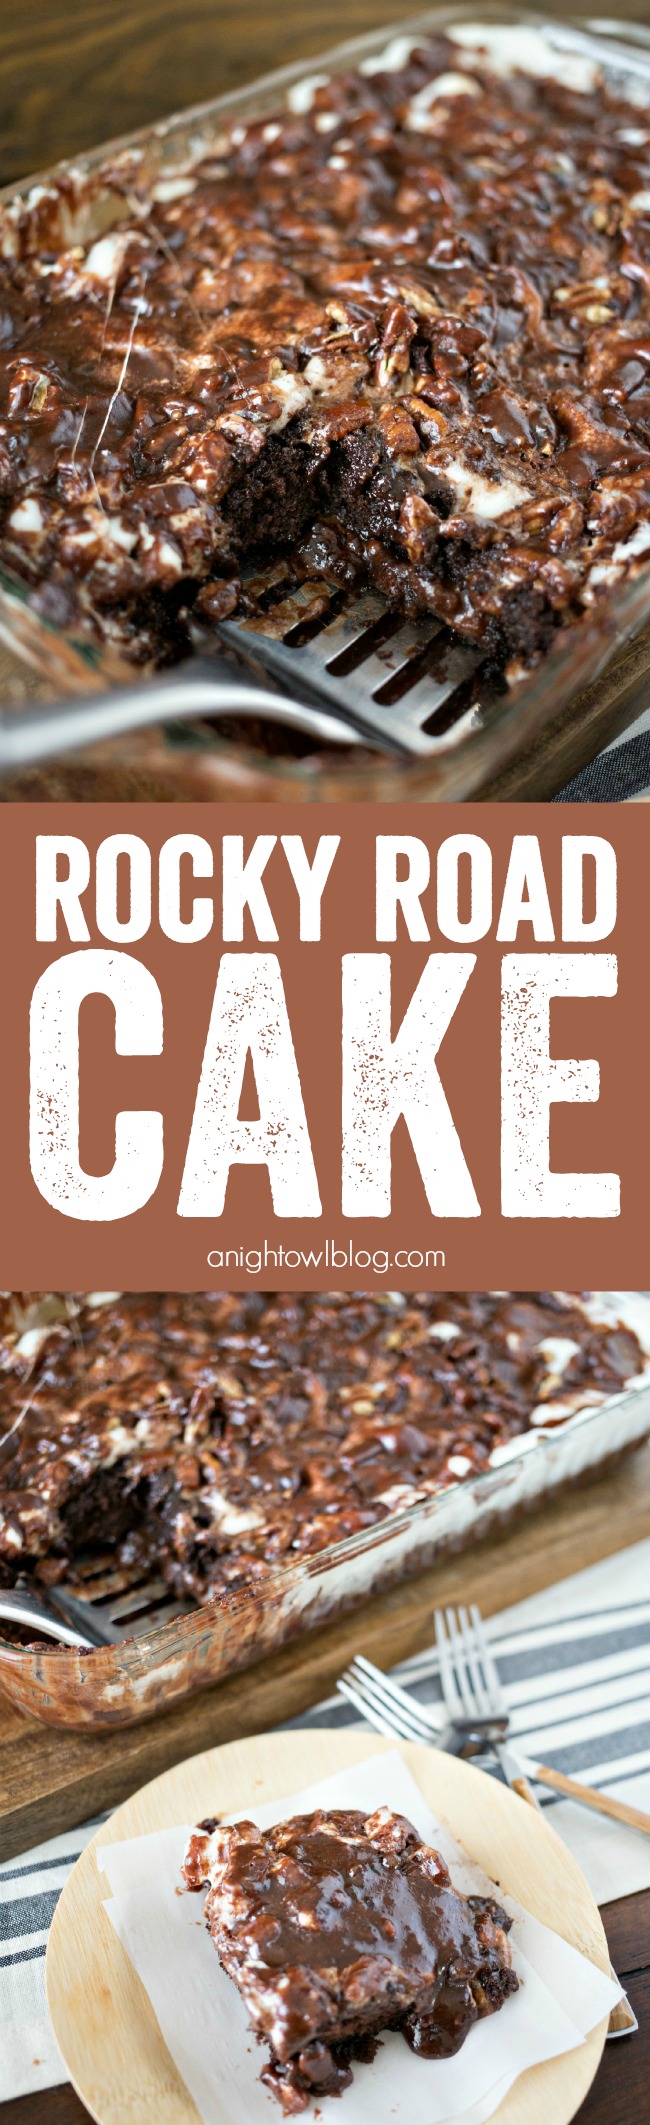 Rocky Road Cake - a delicious combination of chocolate, marshmallows and nuts in one delicious and easy to make dessert!